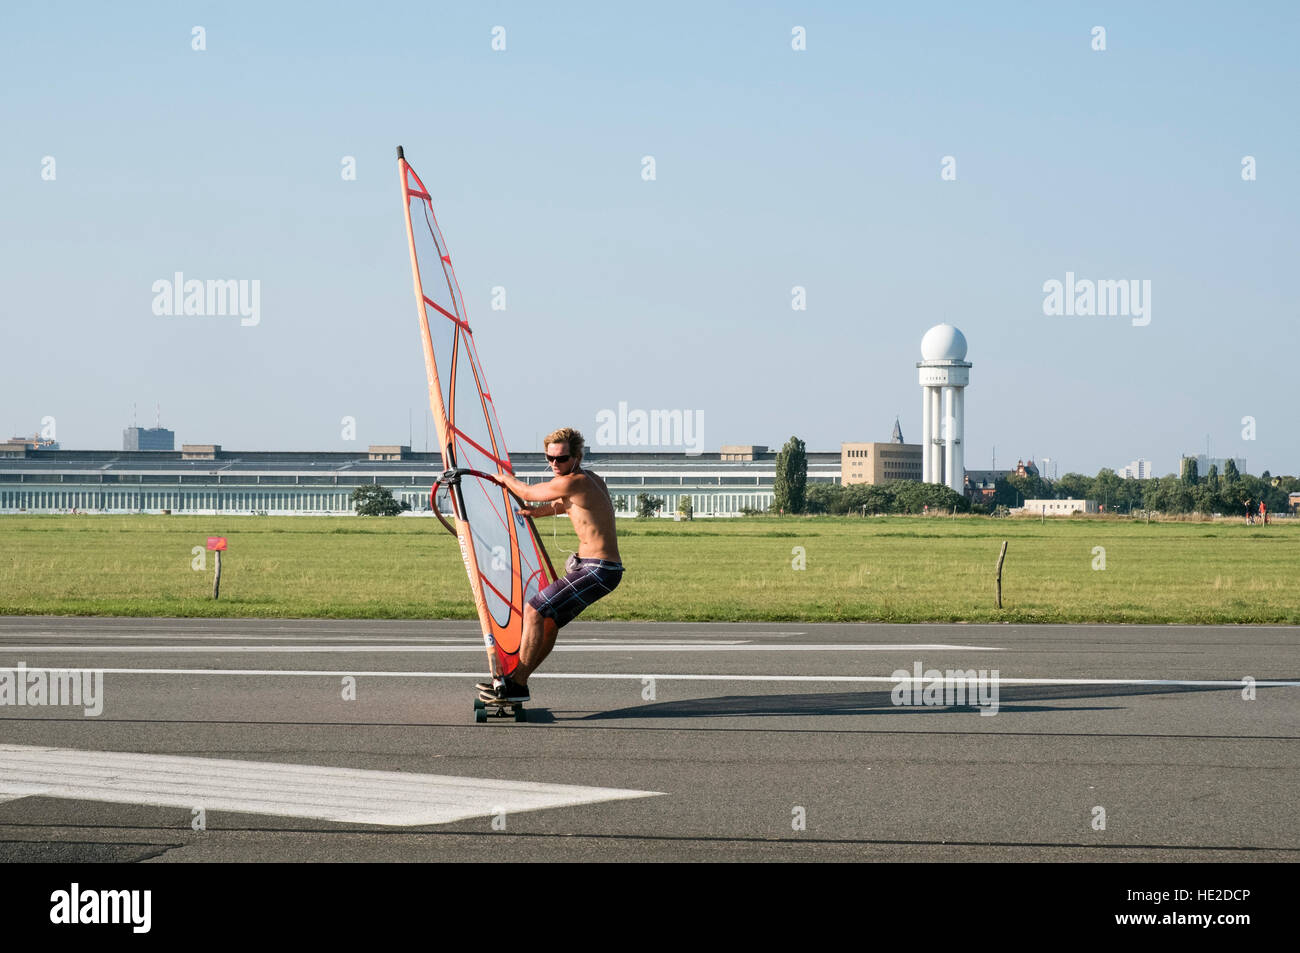 Land surfing at Tempelhof Park former airport in Berlin Germany Stock Photo